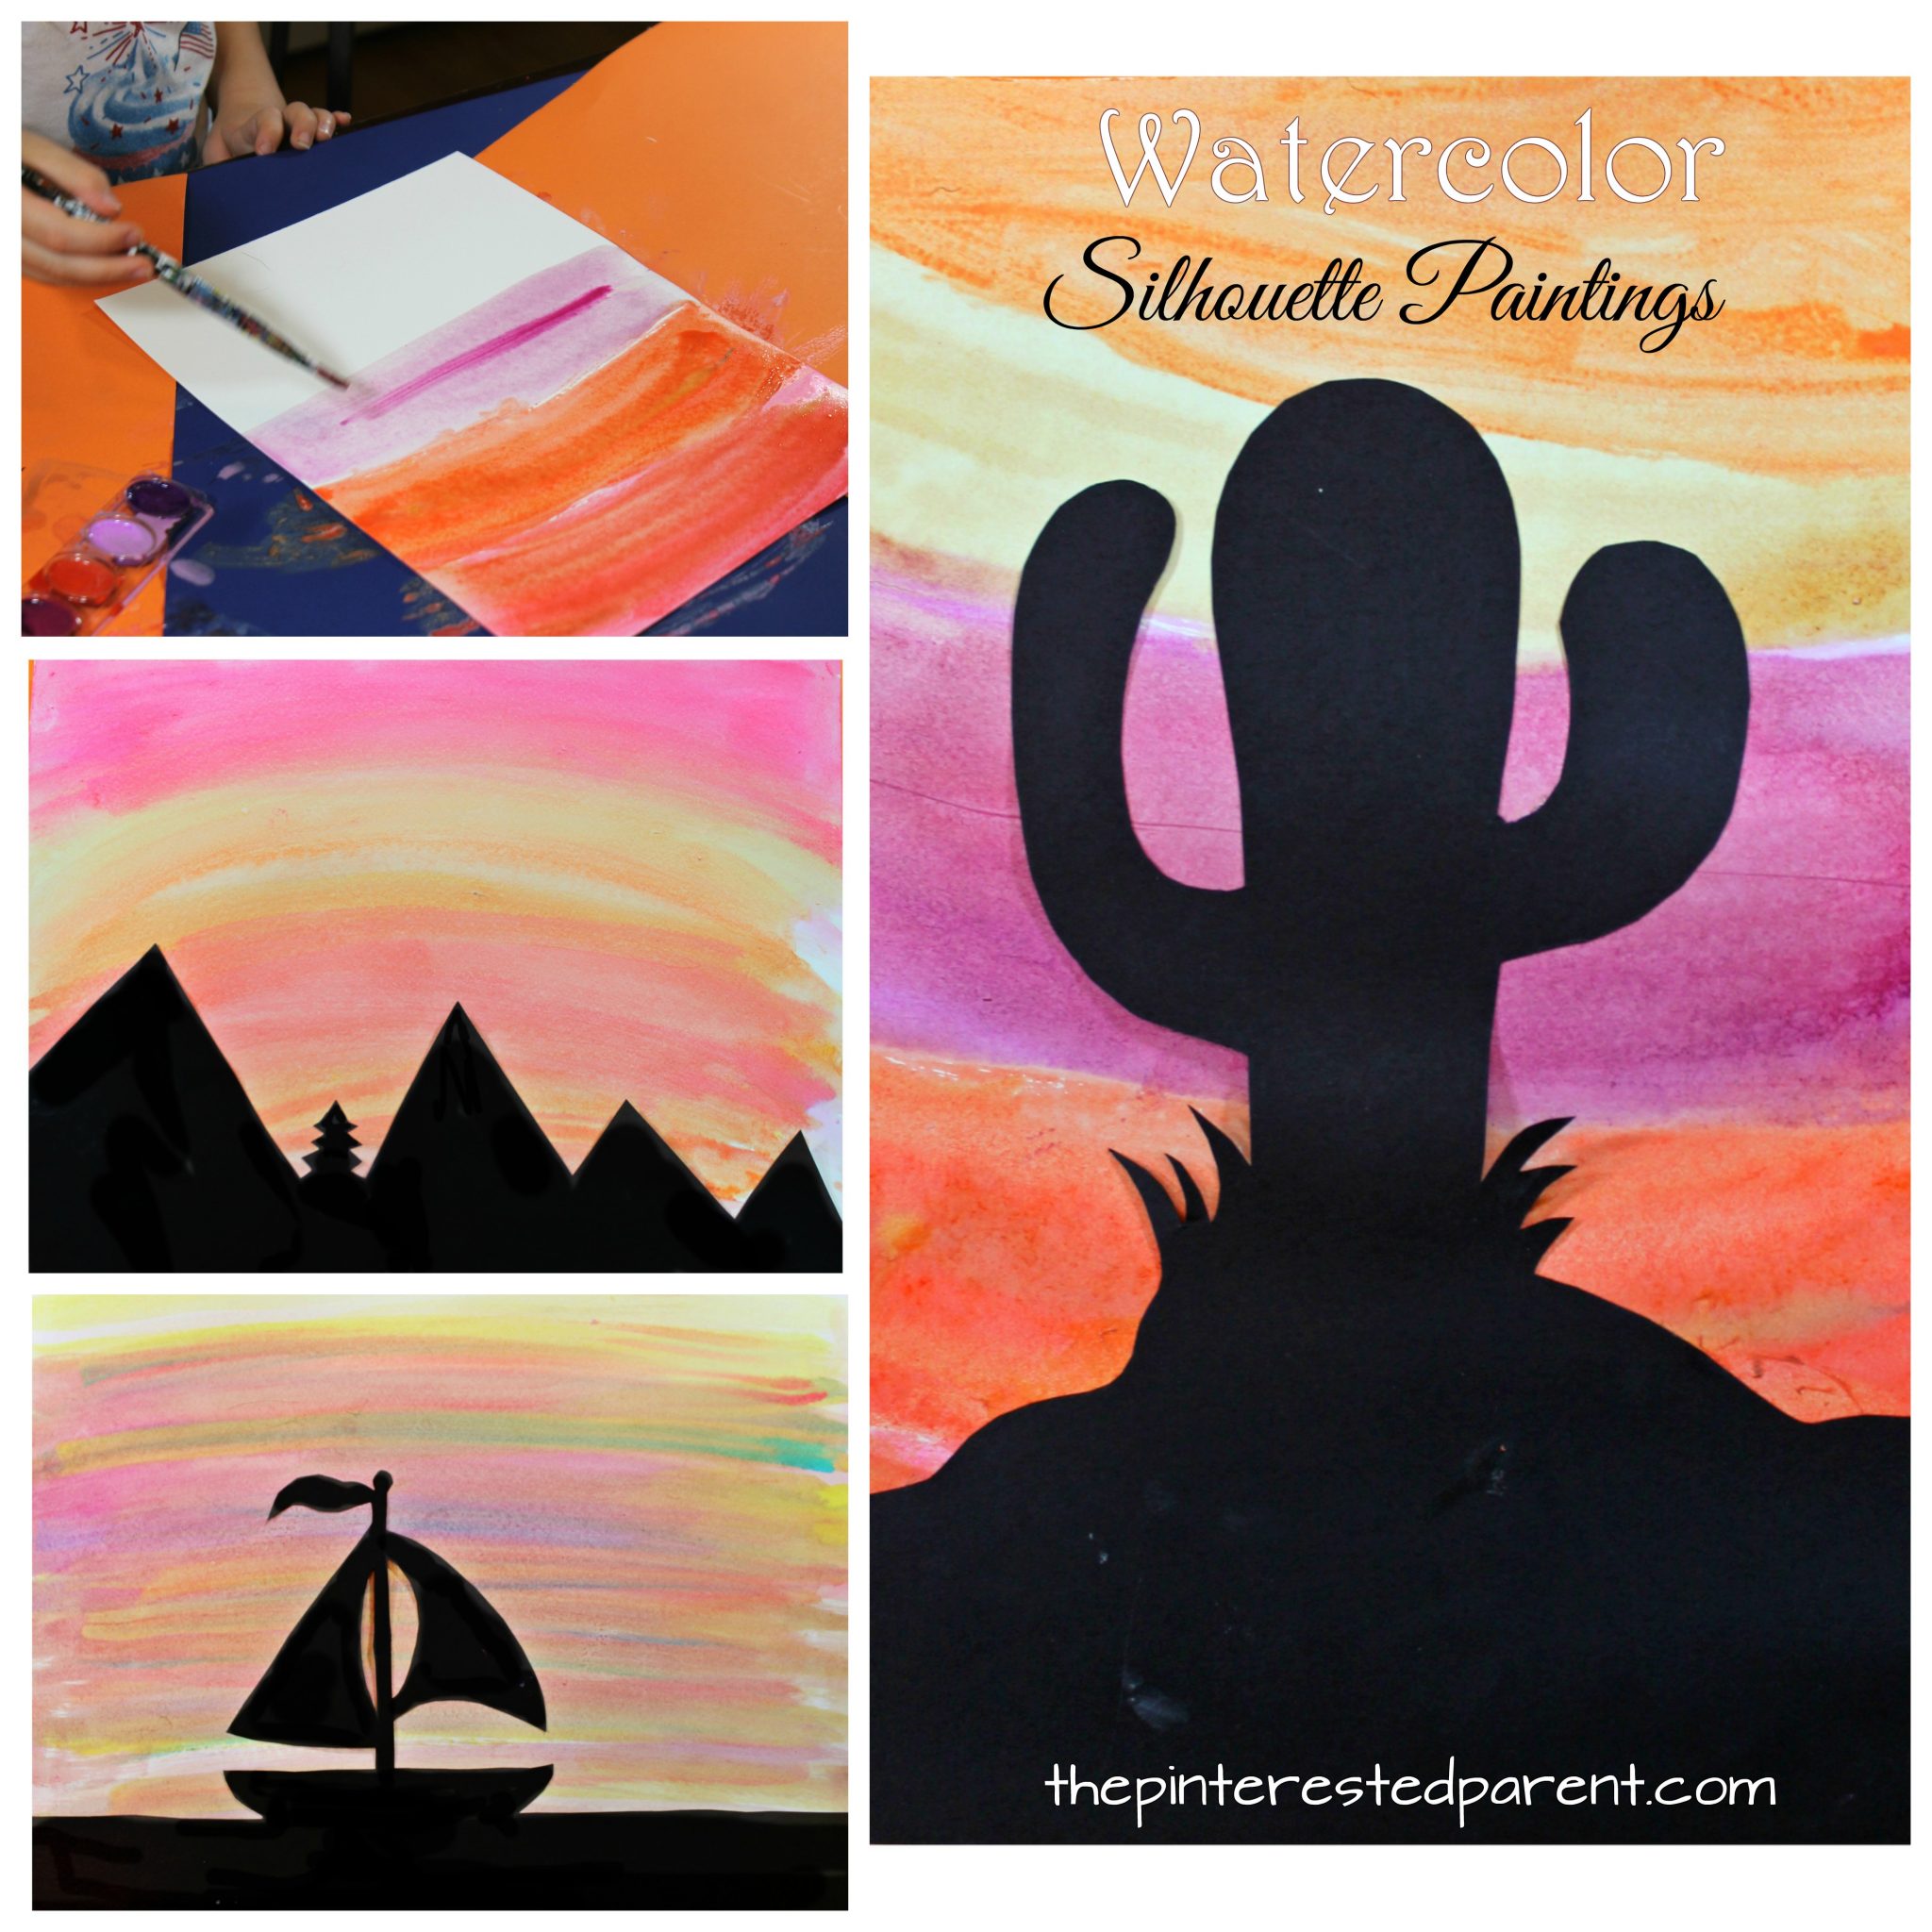 Watercolor silhouette landscape paintings for kids with free printable templates - cactus, mountains, sailboat sunset scenes. Kid's arts and crafts